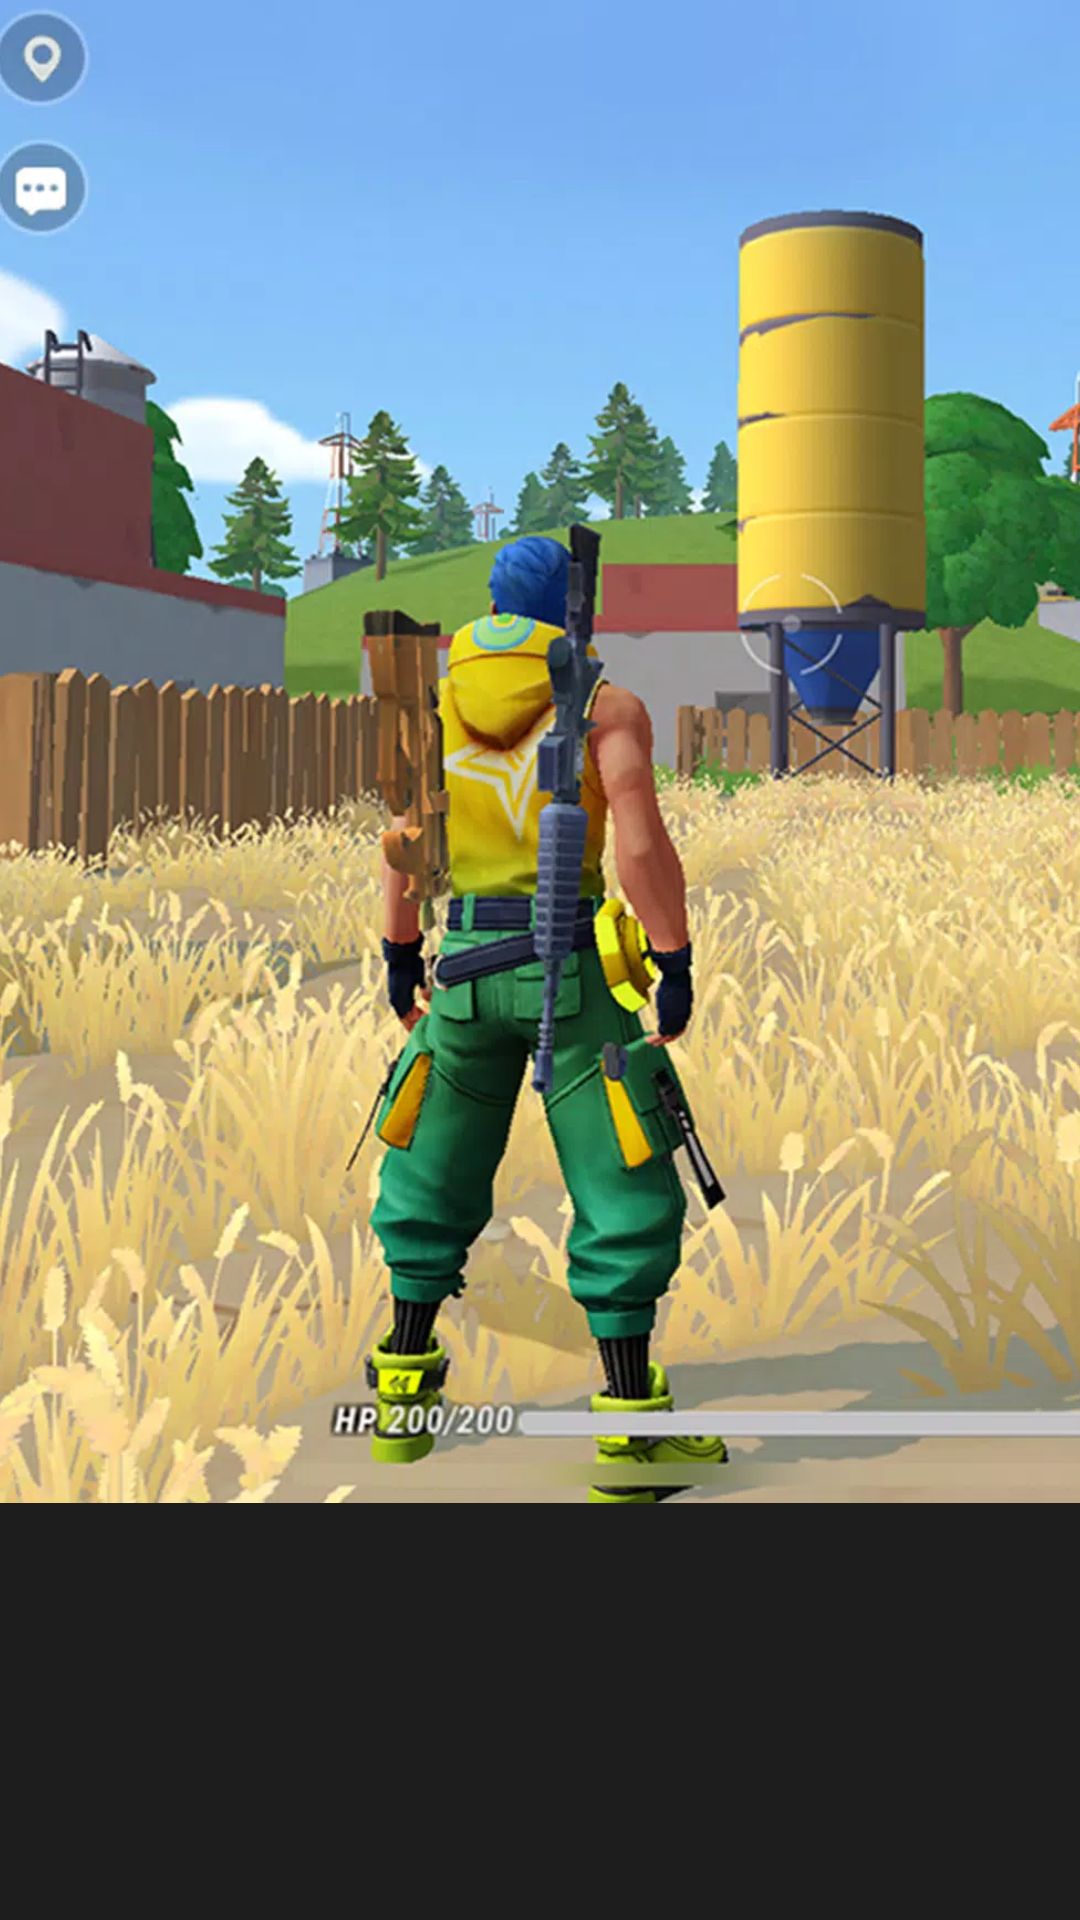 Download Sigma Battle Royale : Mobile on PC with MEmu